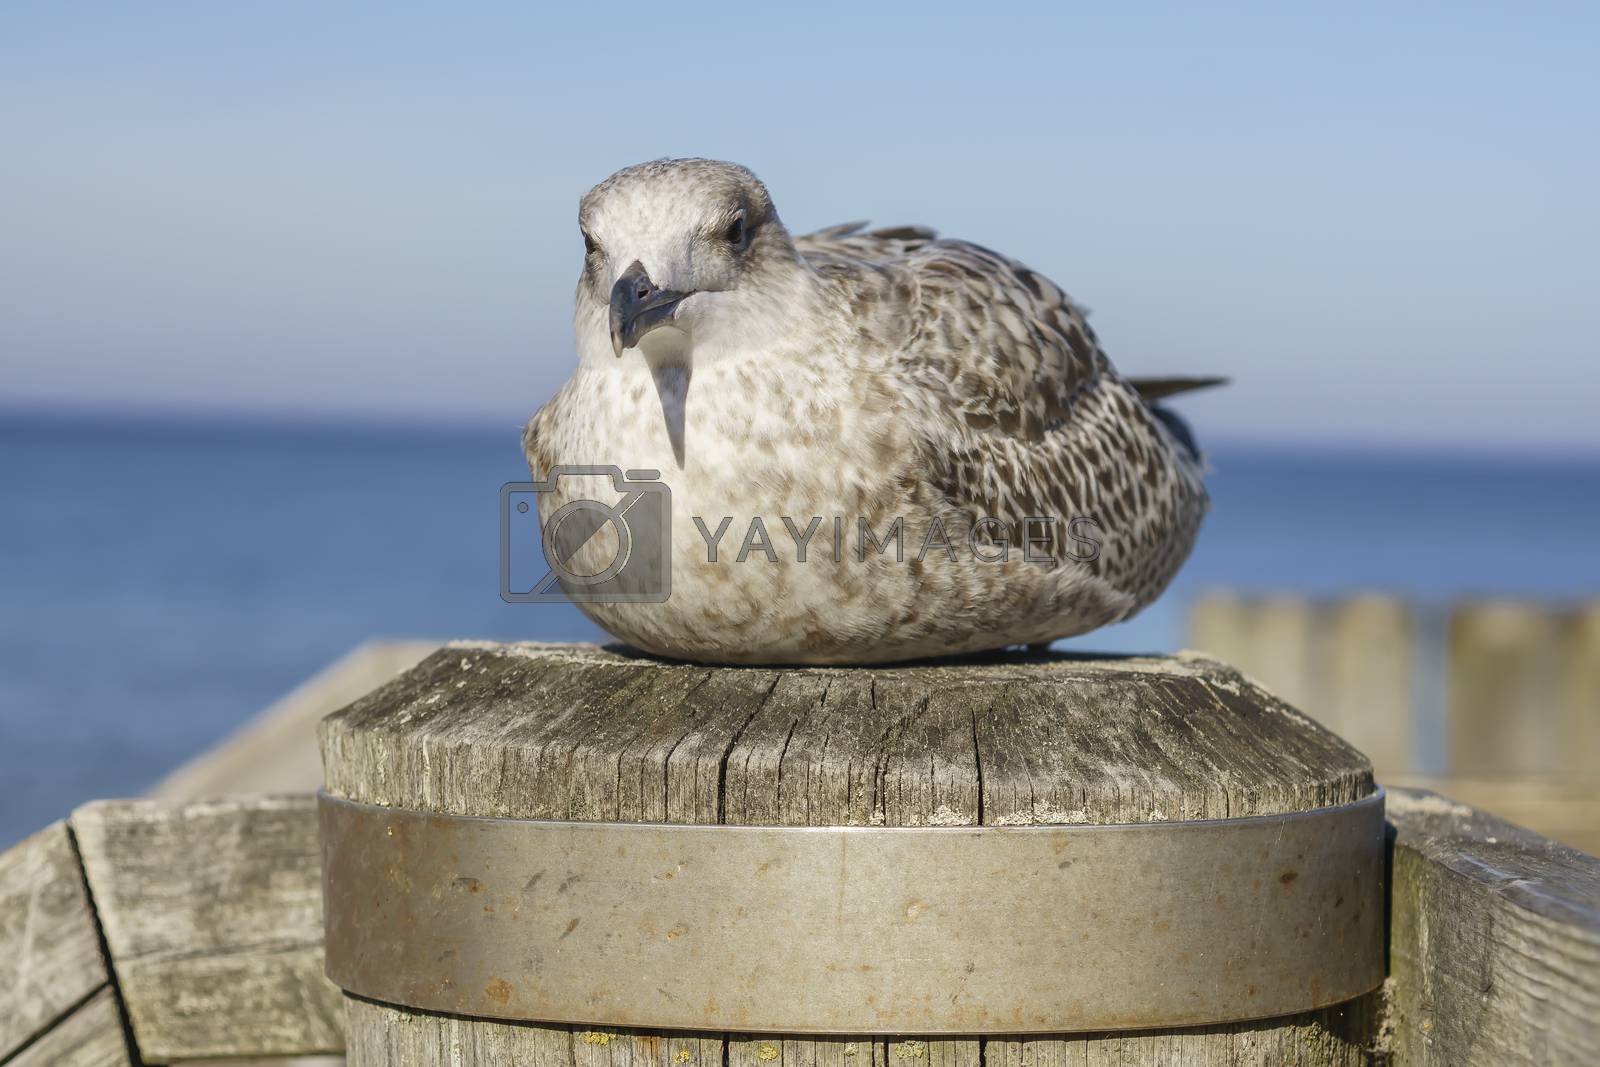 Royalty free image of sea gull on boat dock at baltic sea beach by mario_plechaty_photography